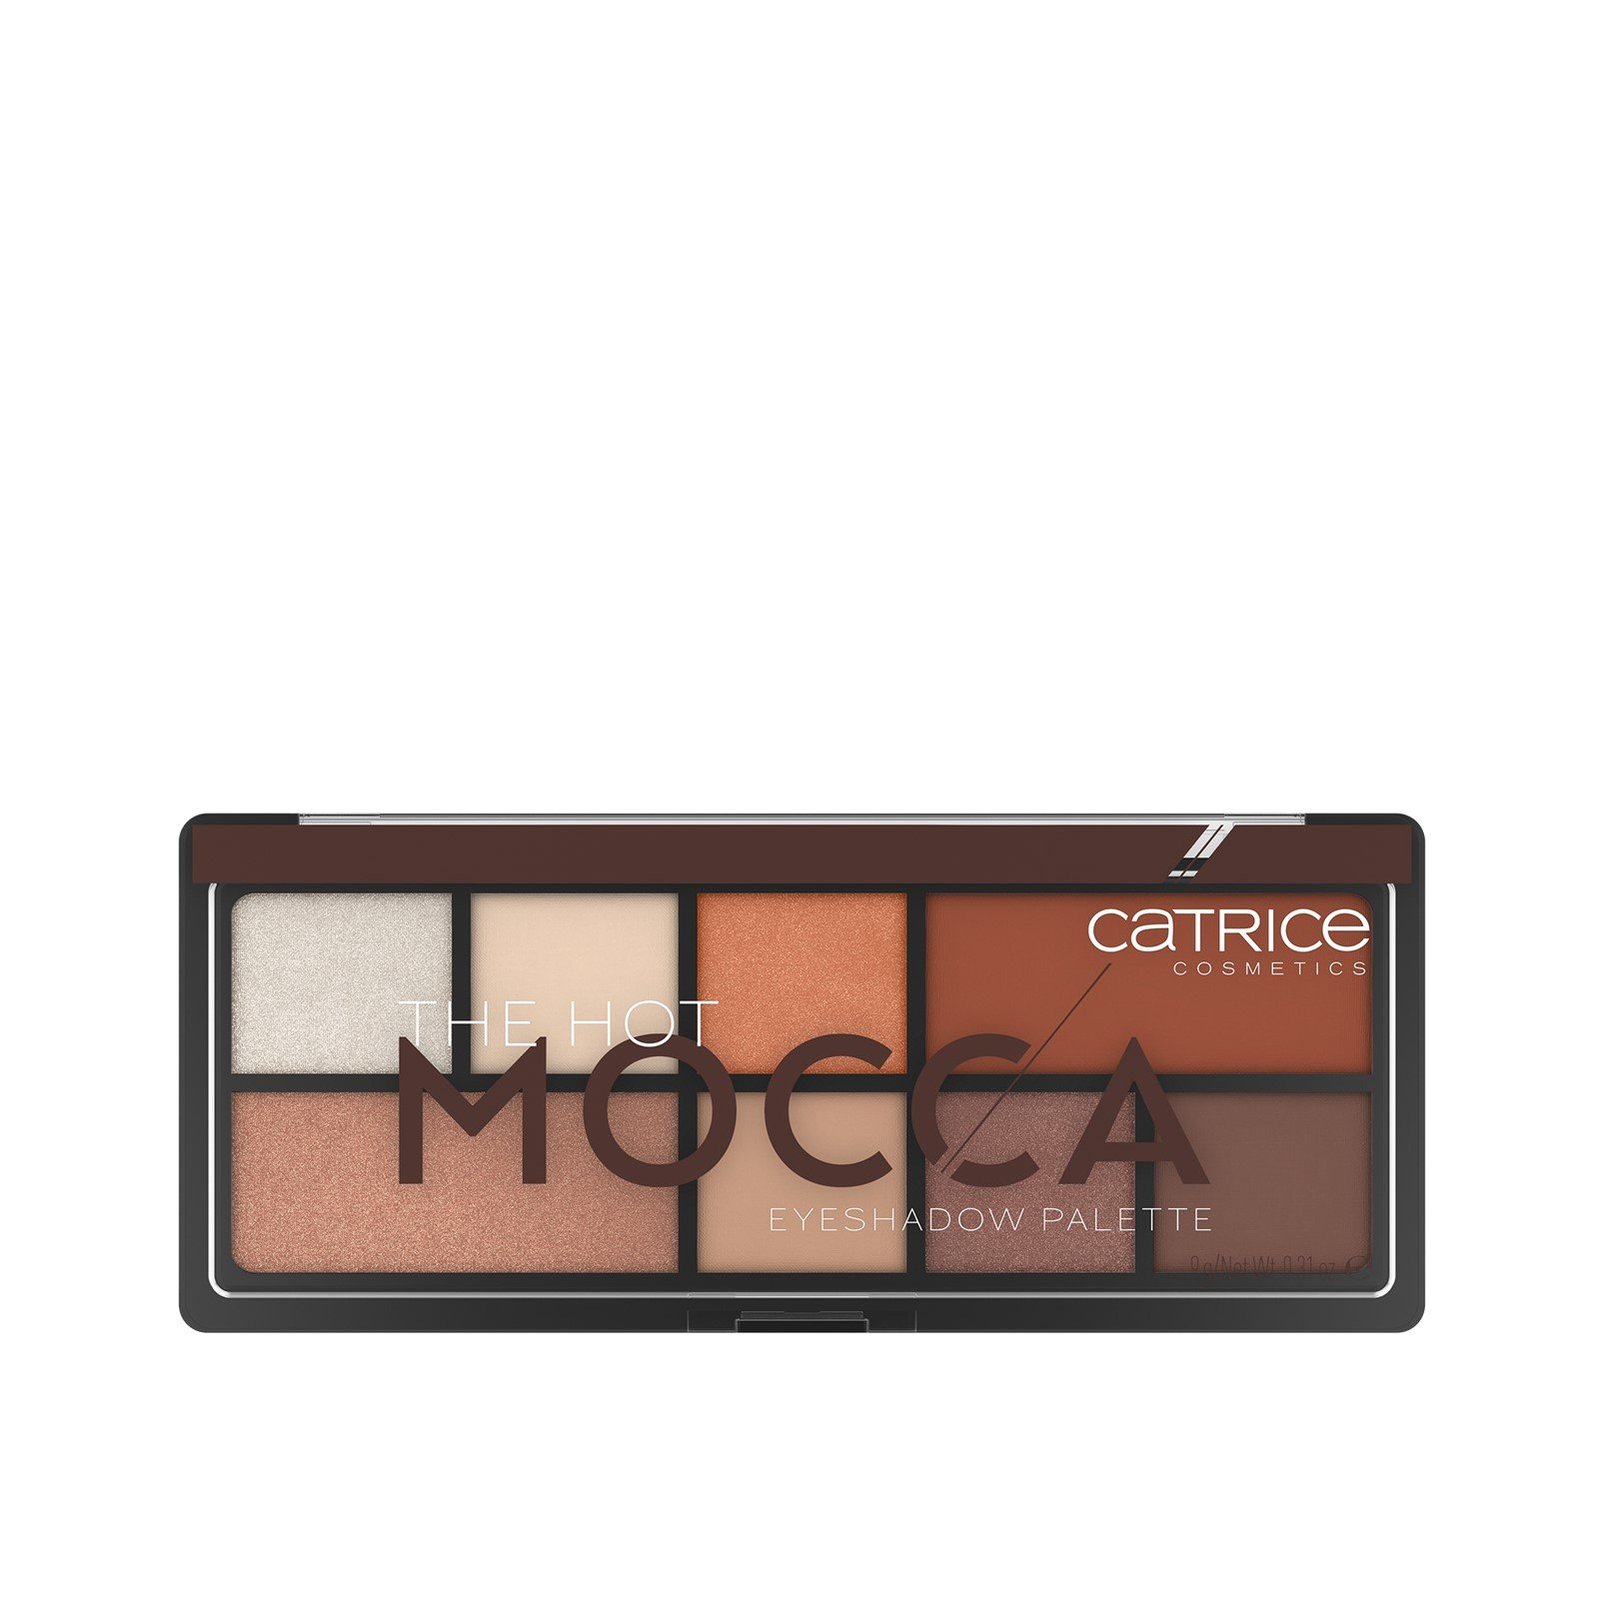 Catrice The Hot Mocca Eyeshadow Palette 9g (0.31 oz)